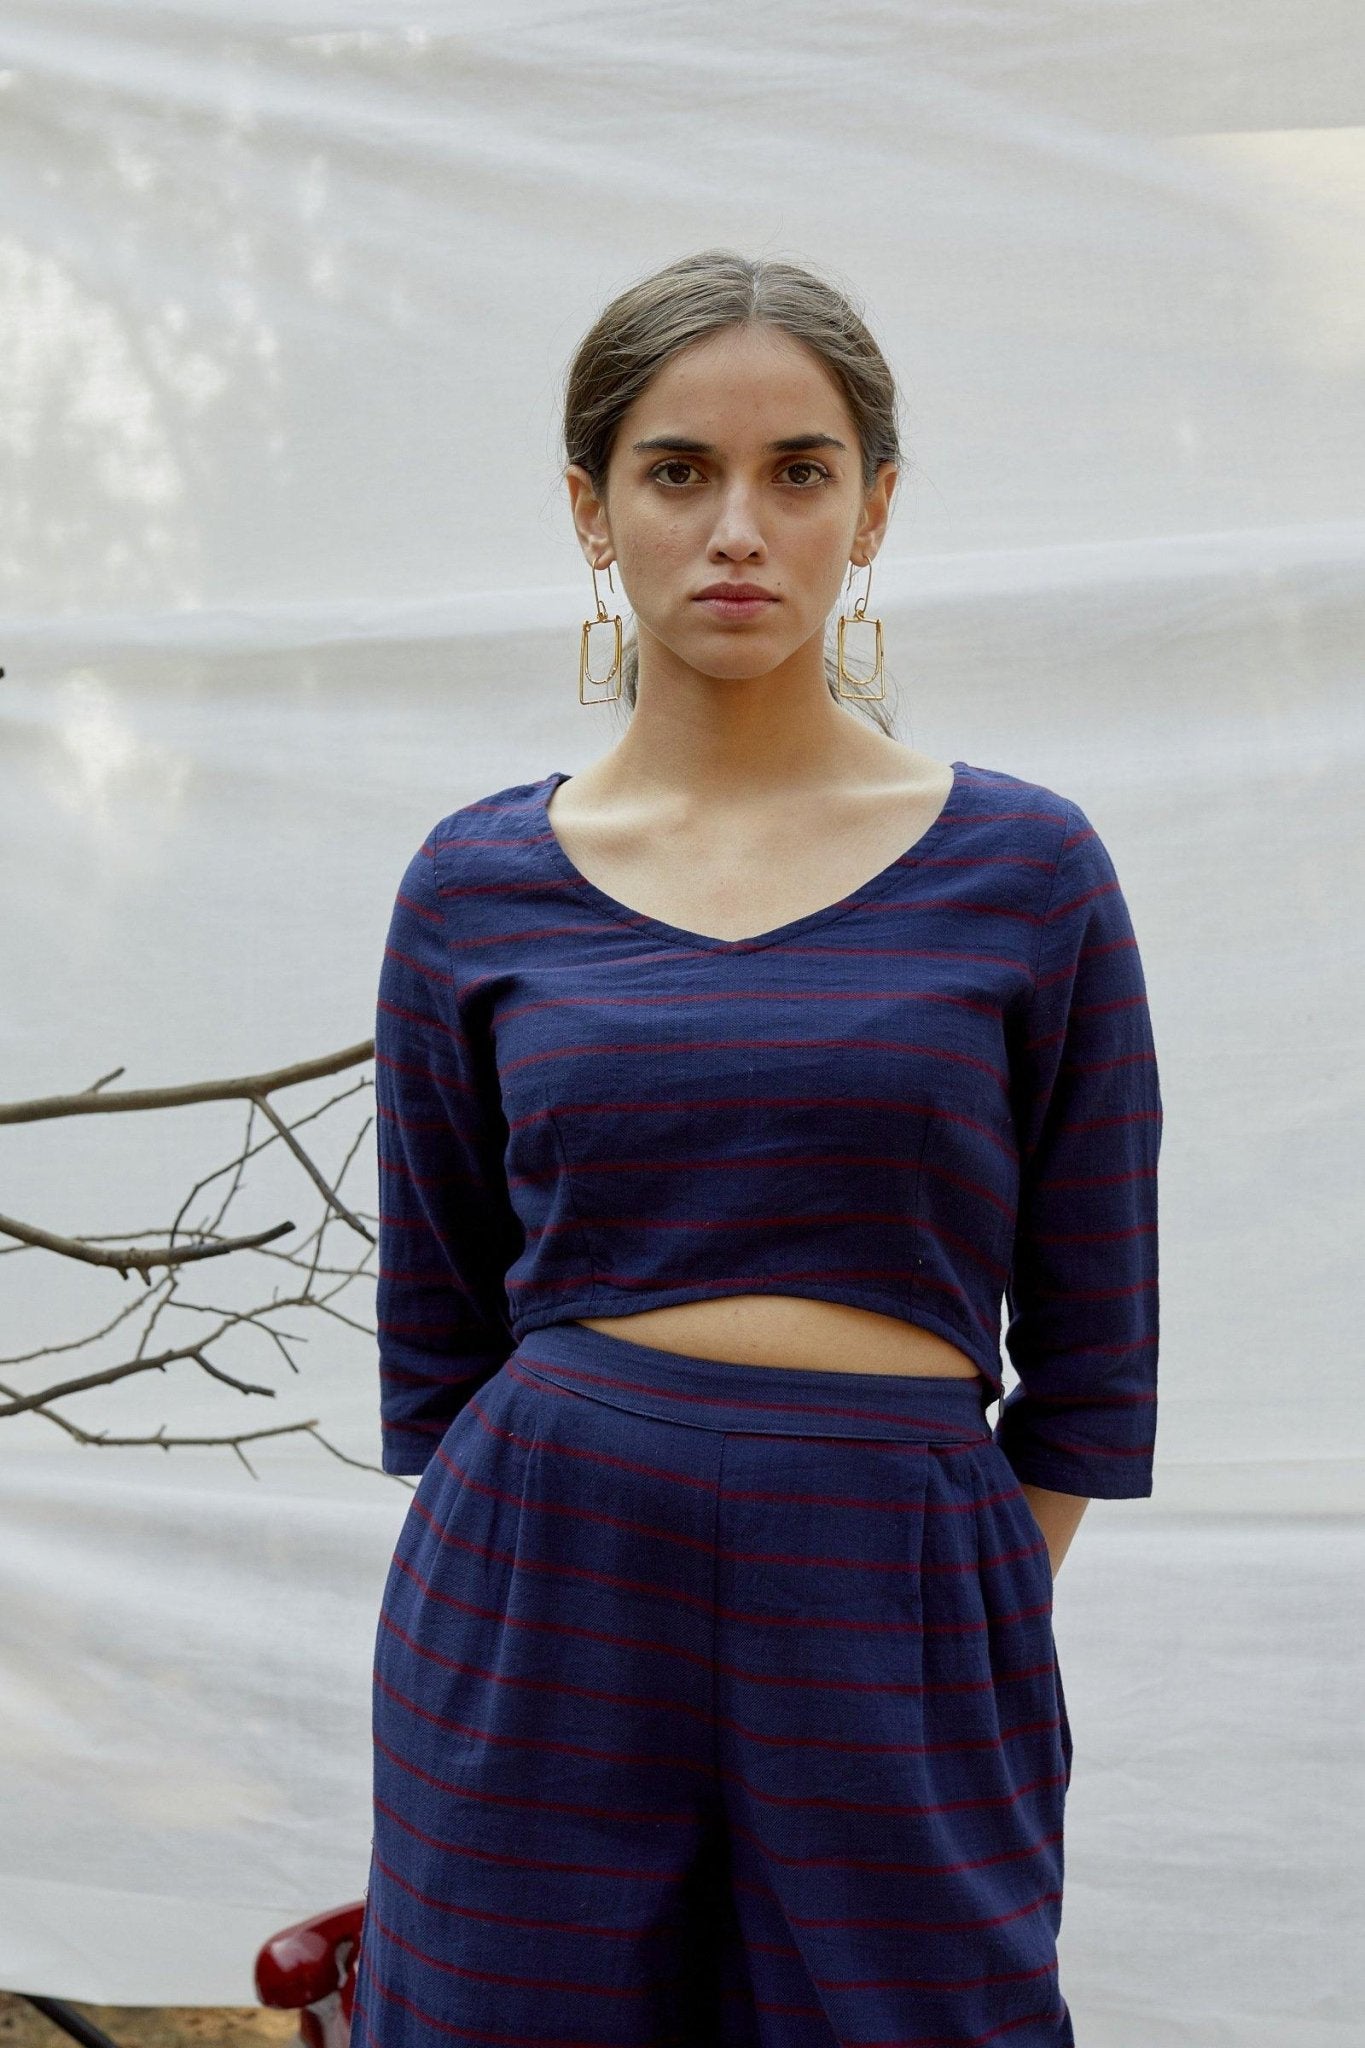 Blue Red Cotton Twill Stripe High Low Crop Top - The Indian Cause